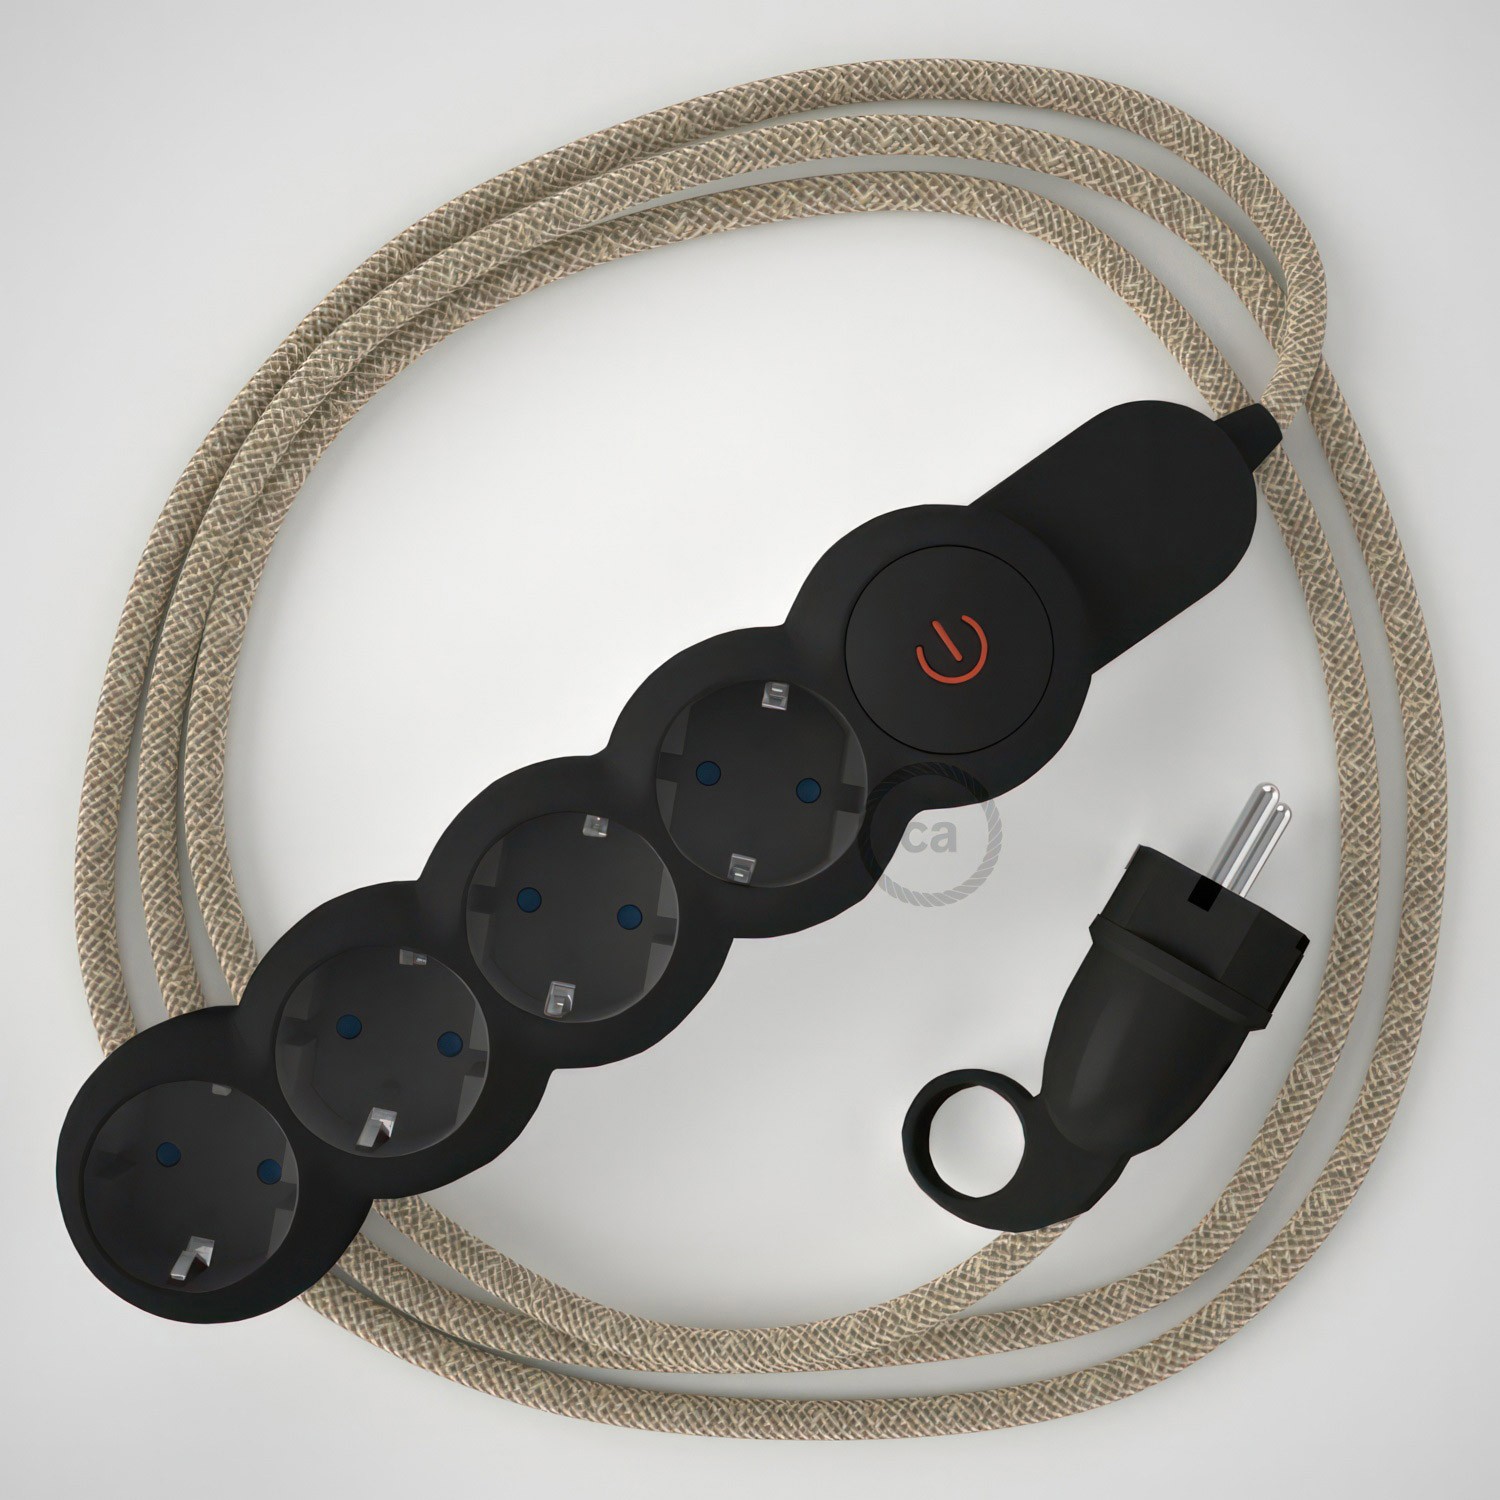 German Power Strip with electrical cable covered in Neutral Natural Linen fabric RN01 and Schuko plug with confort ring